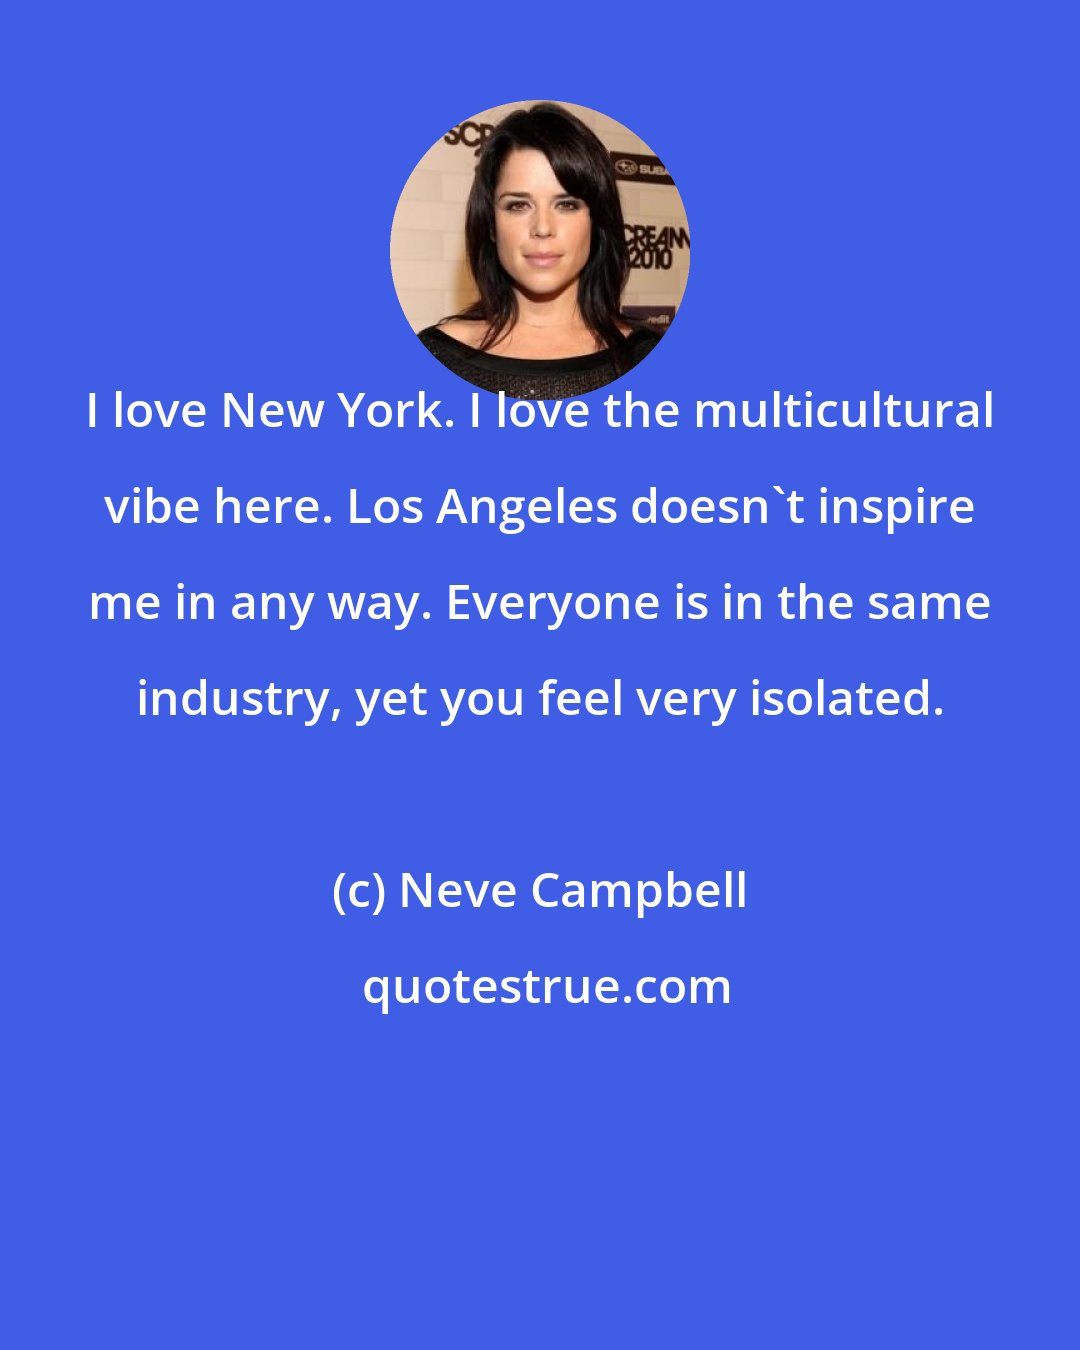 Neve Campbell: I love New York. I love the multicultural vibe here. Los Angeles doesn't inspire me in any way. Everyone is in the same industry, yet you feel very isolated.